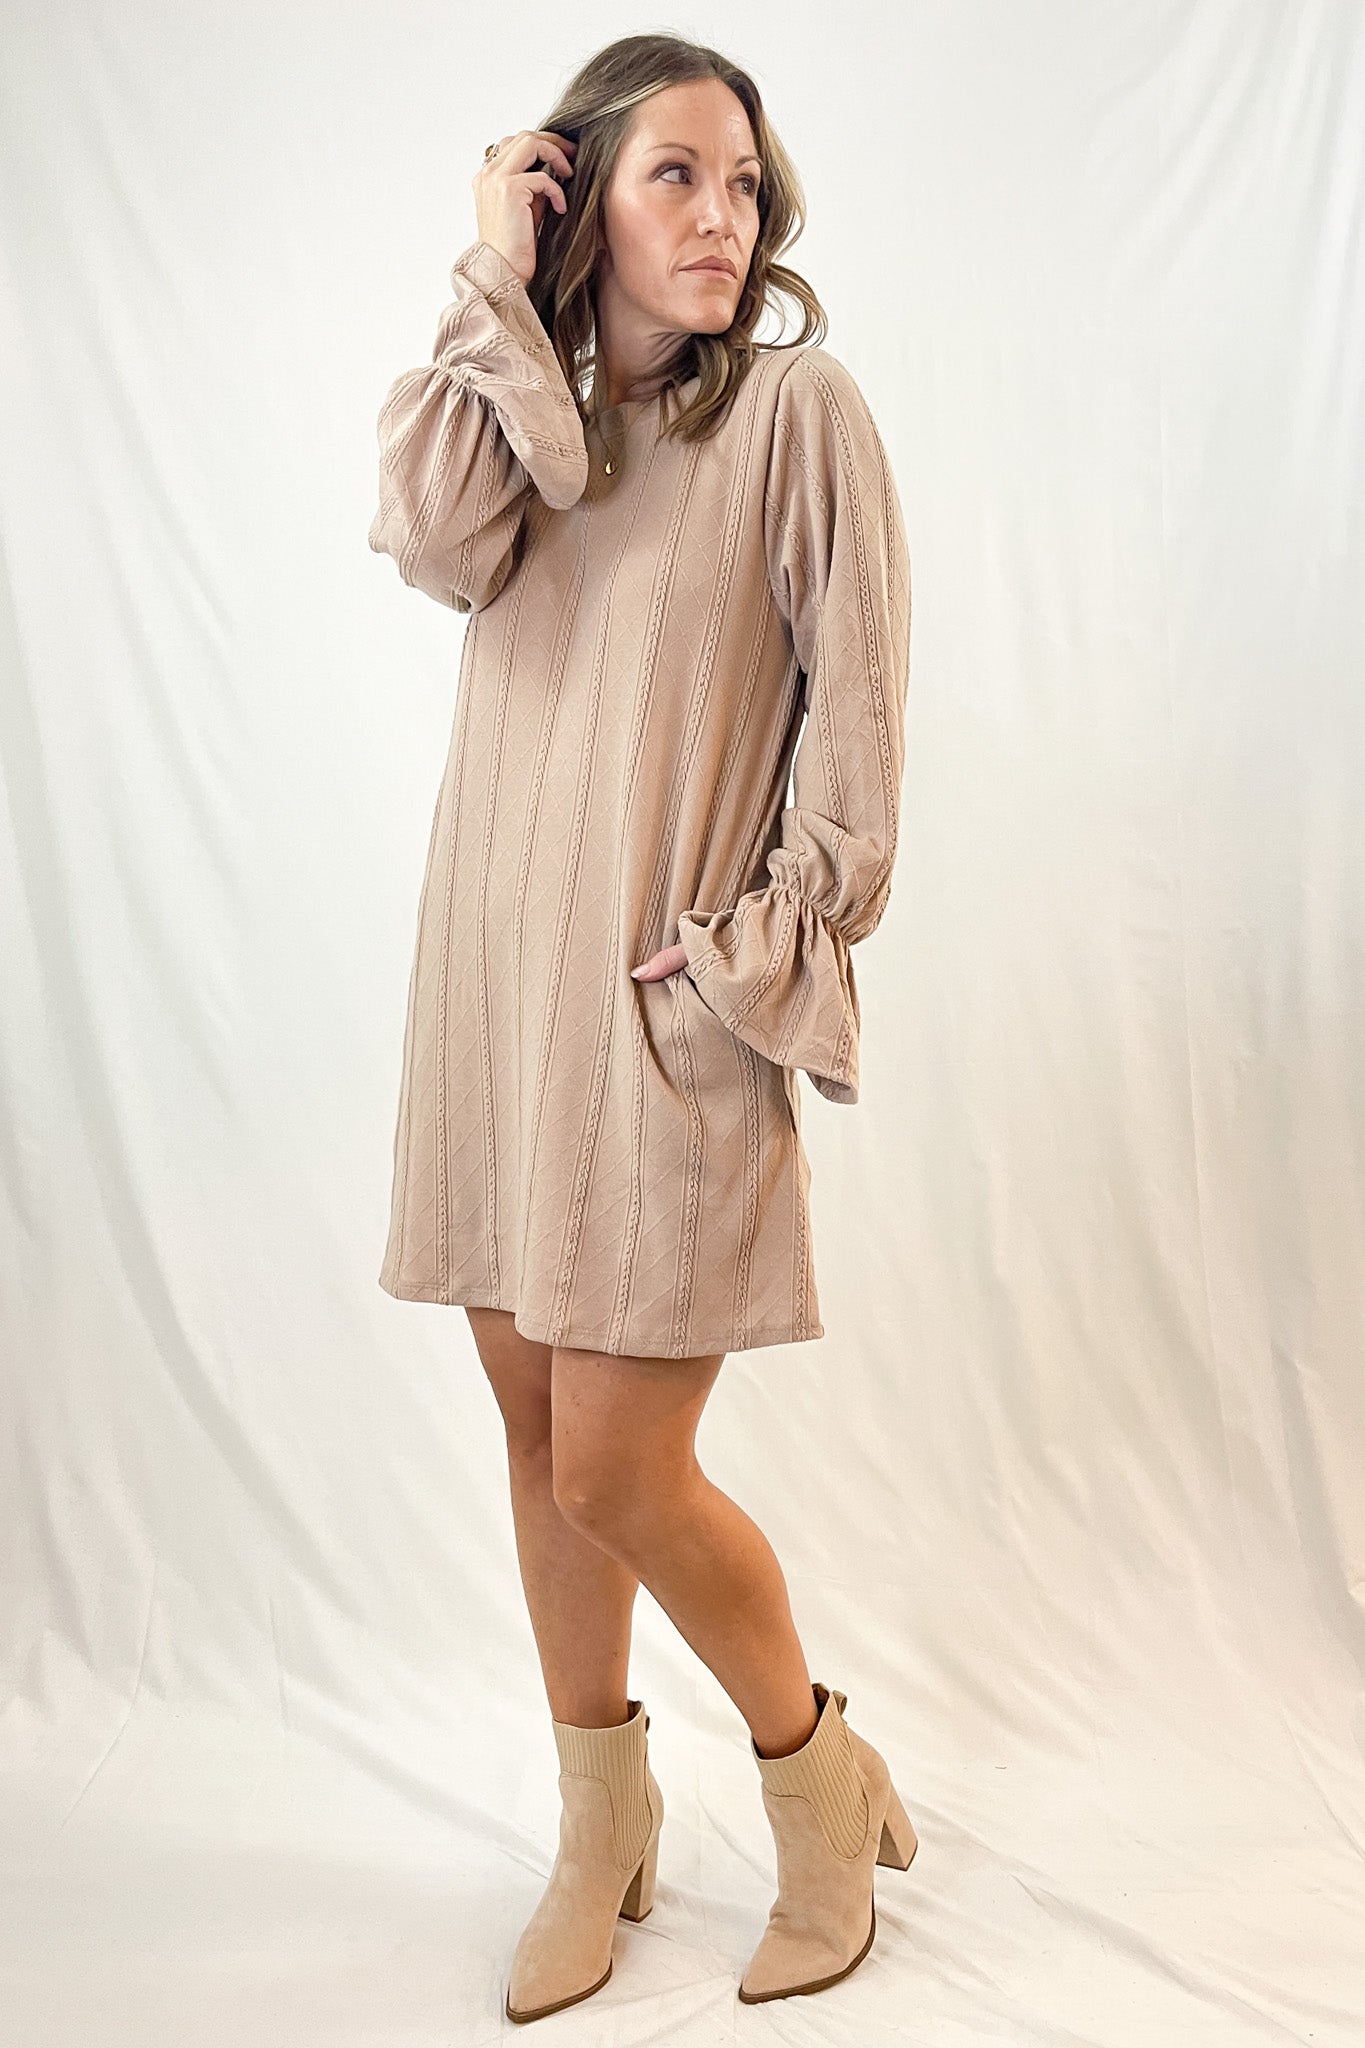 Textured Knit Bell Sleeve Dress | 5 Colors